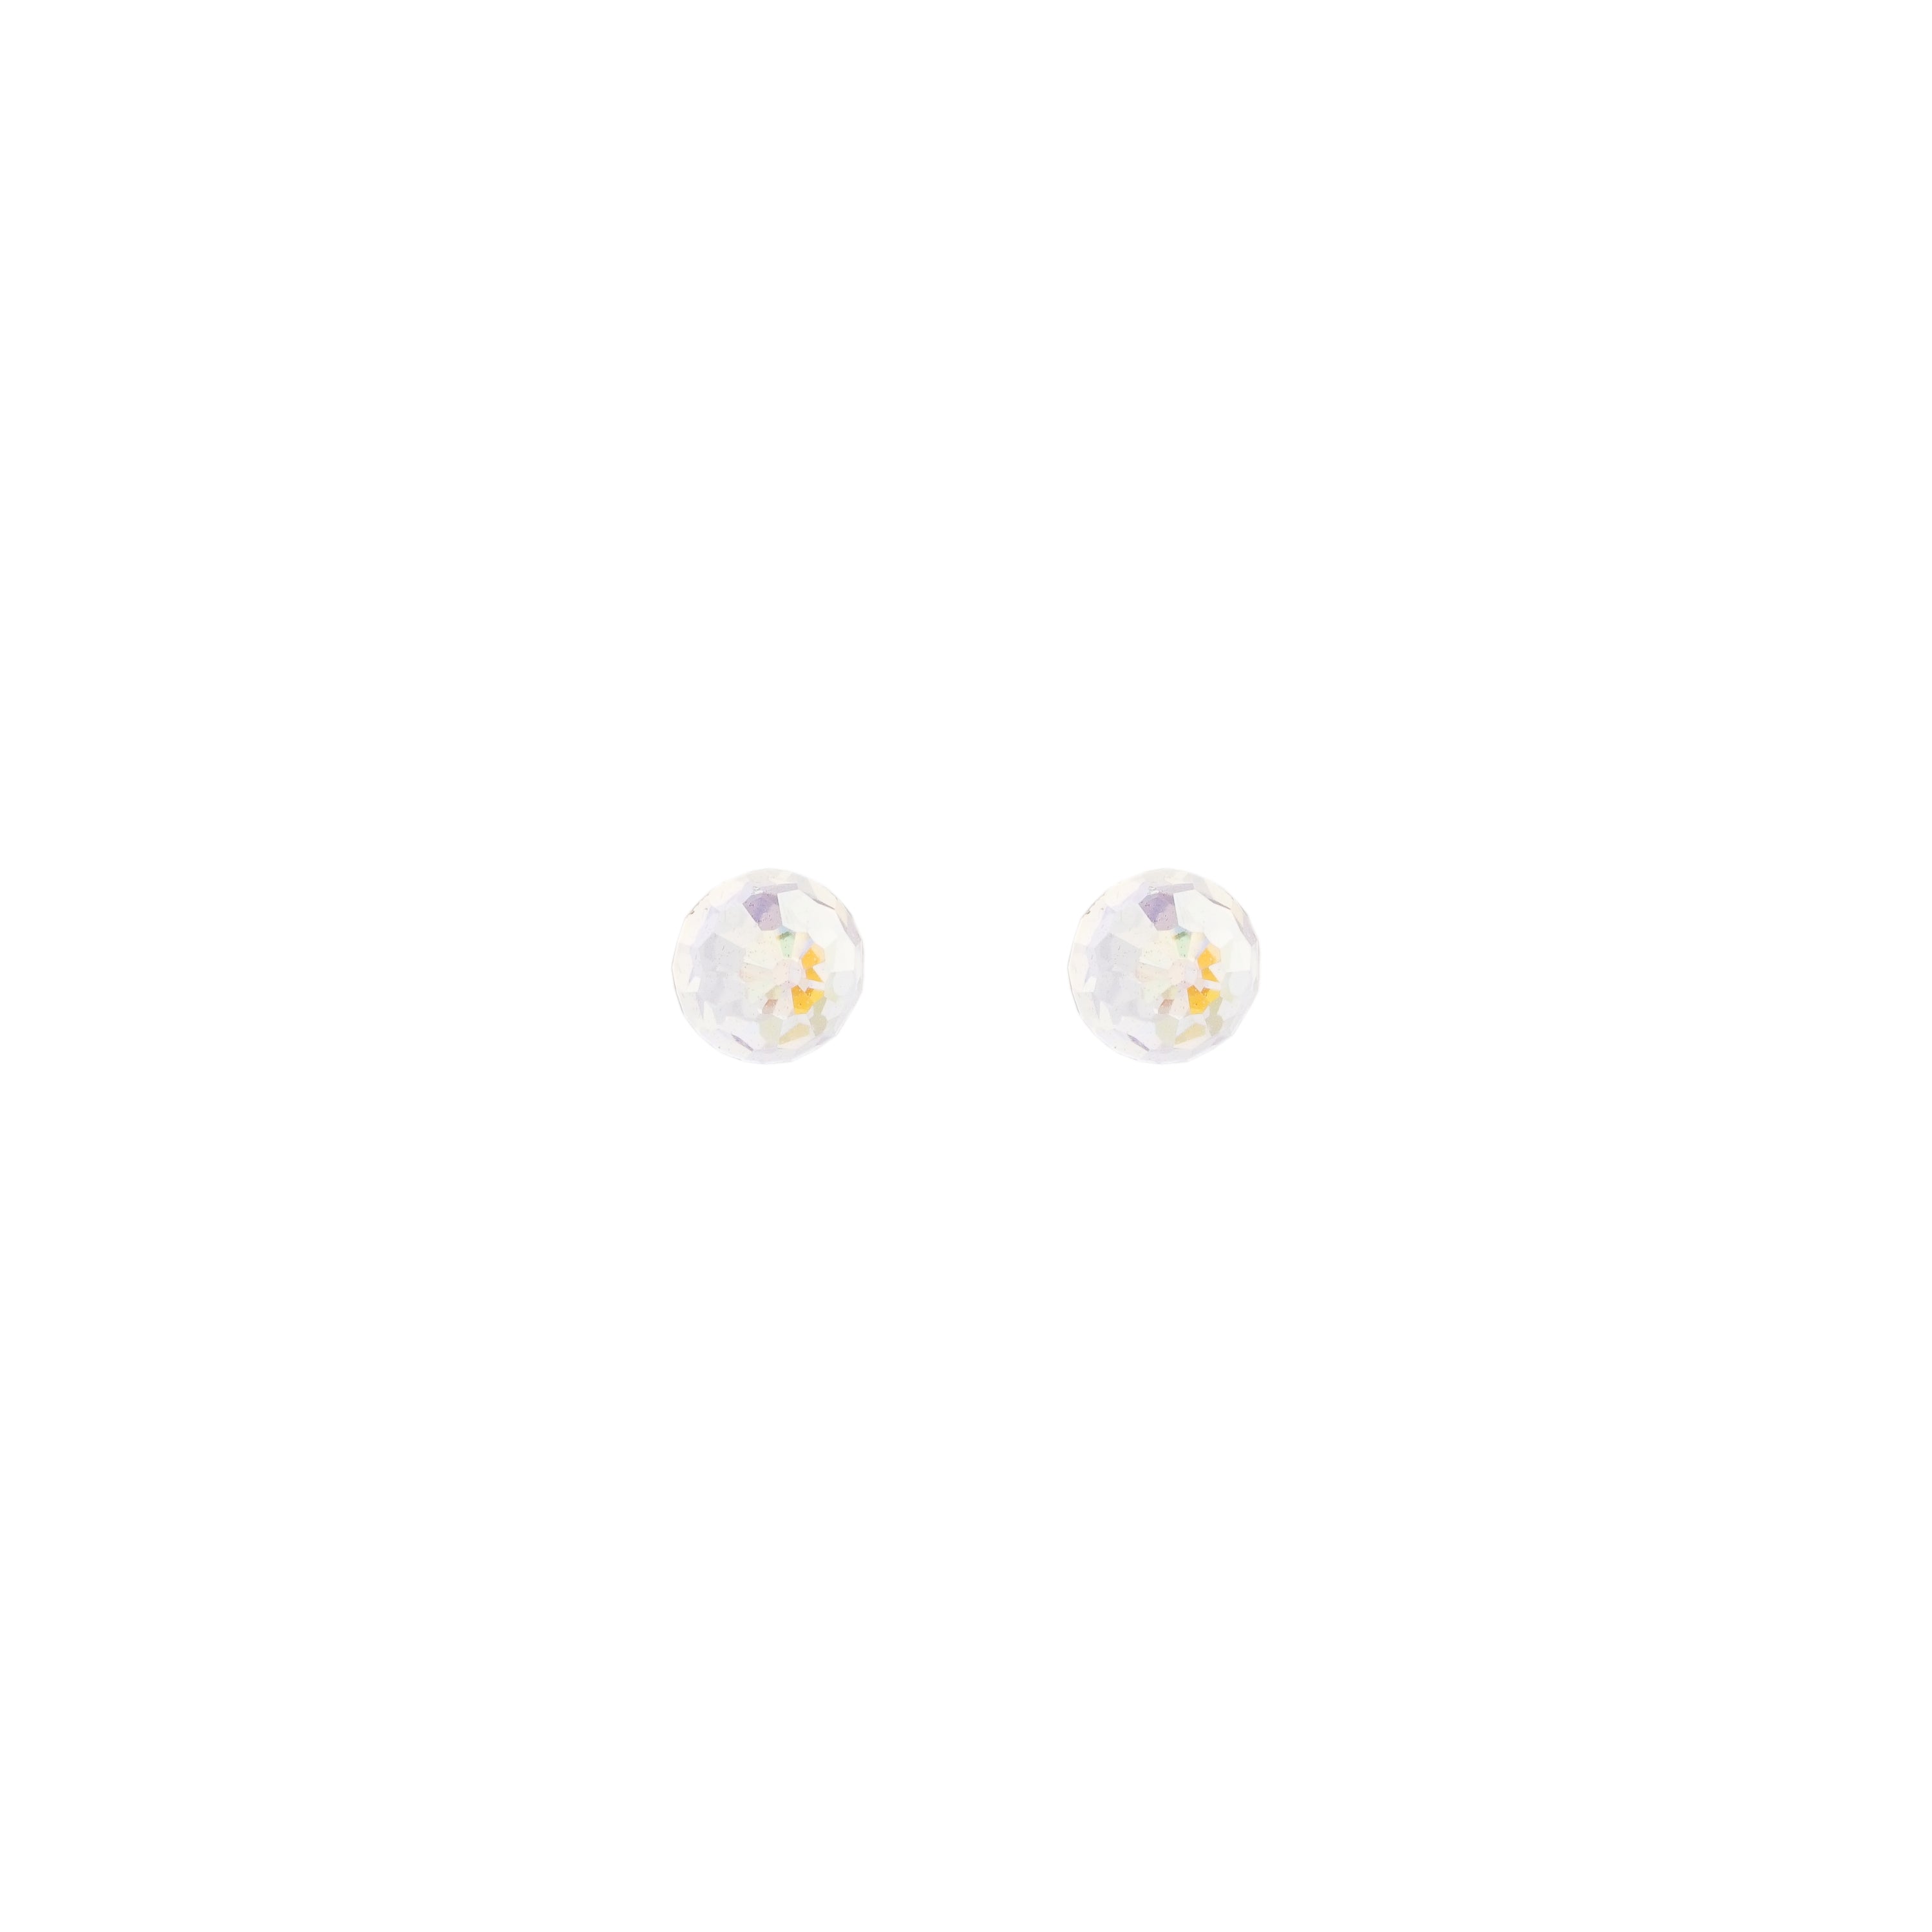 4MM Ab/Rainbow Crystal Ball Allergy free Stainless Steel Ear Studs For Kids